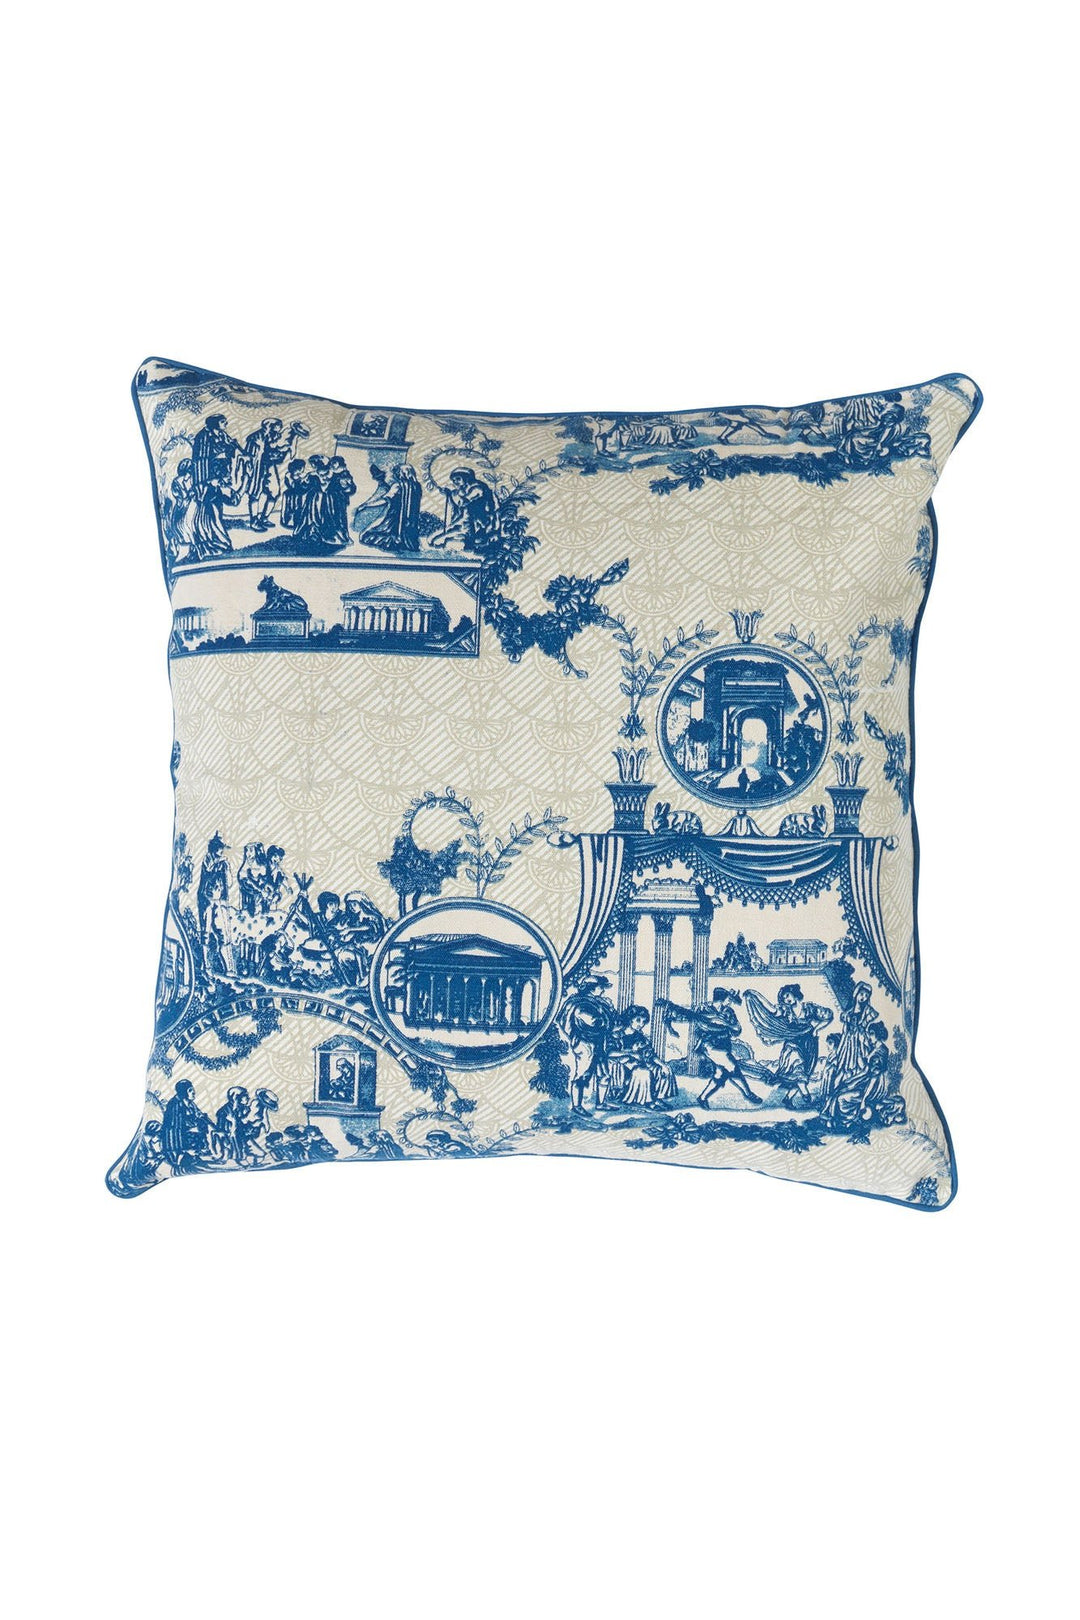 Ancient Columns Blue Square Cotton Cushion - One Hundred Stars